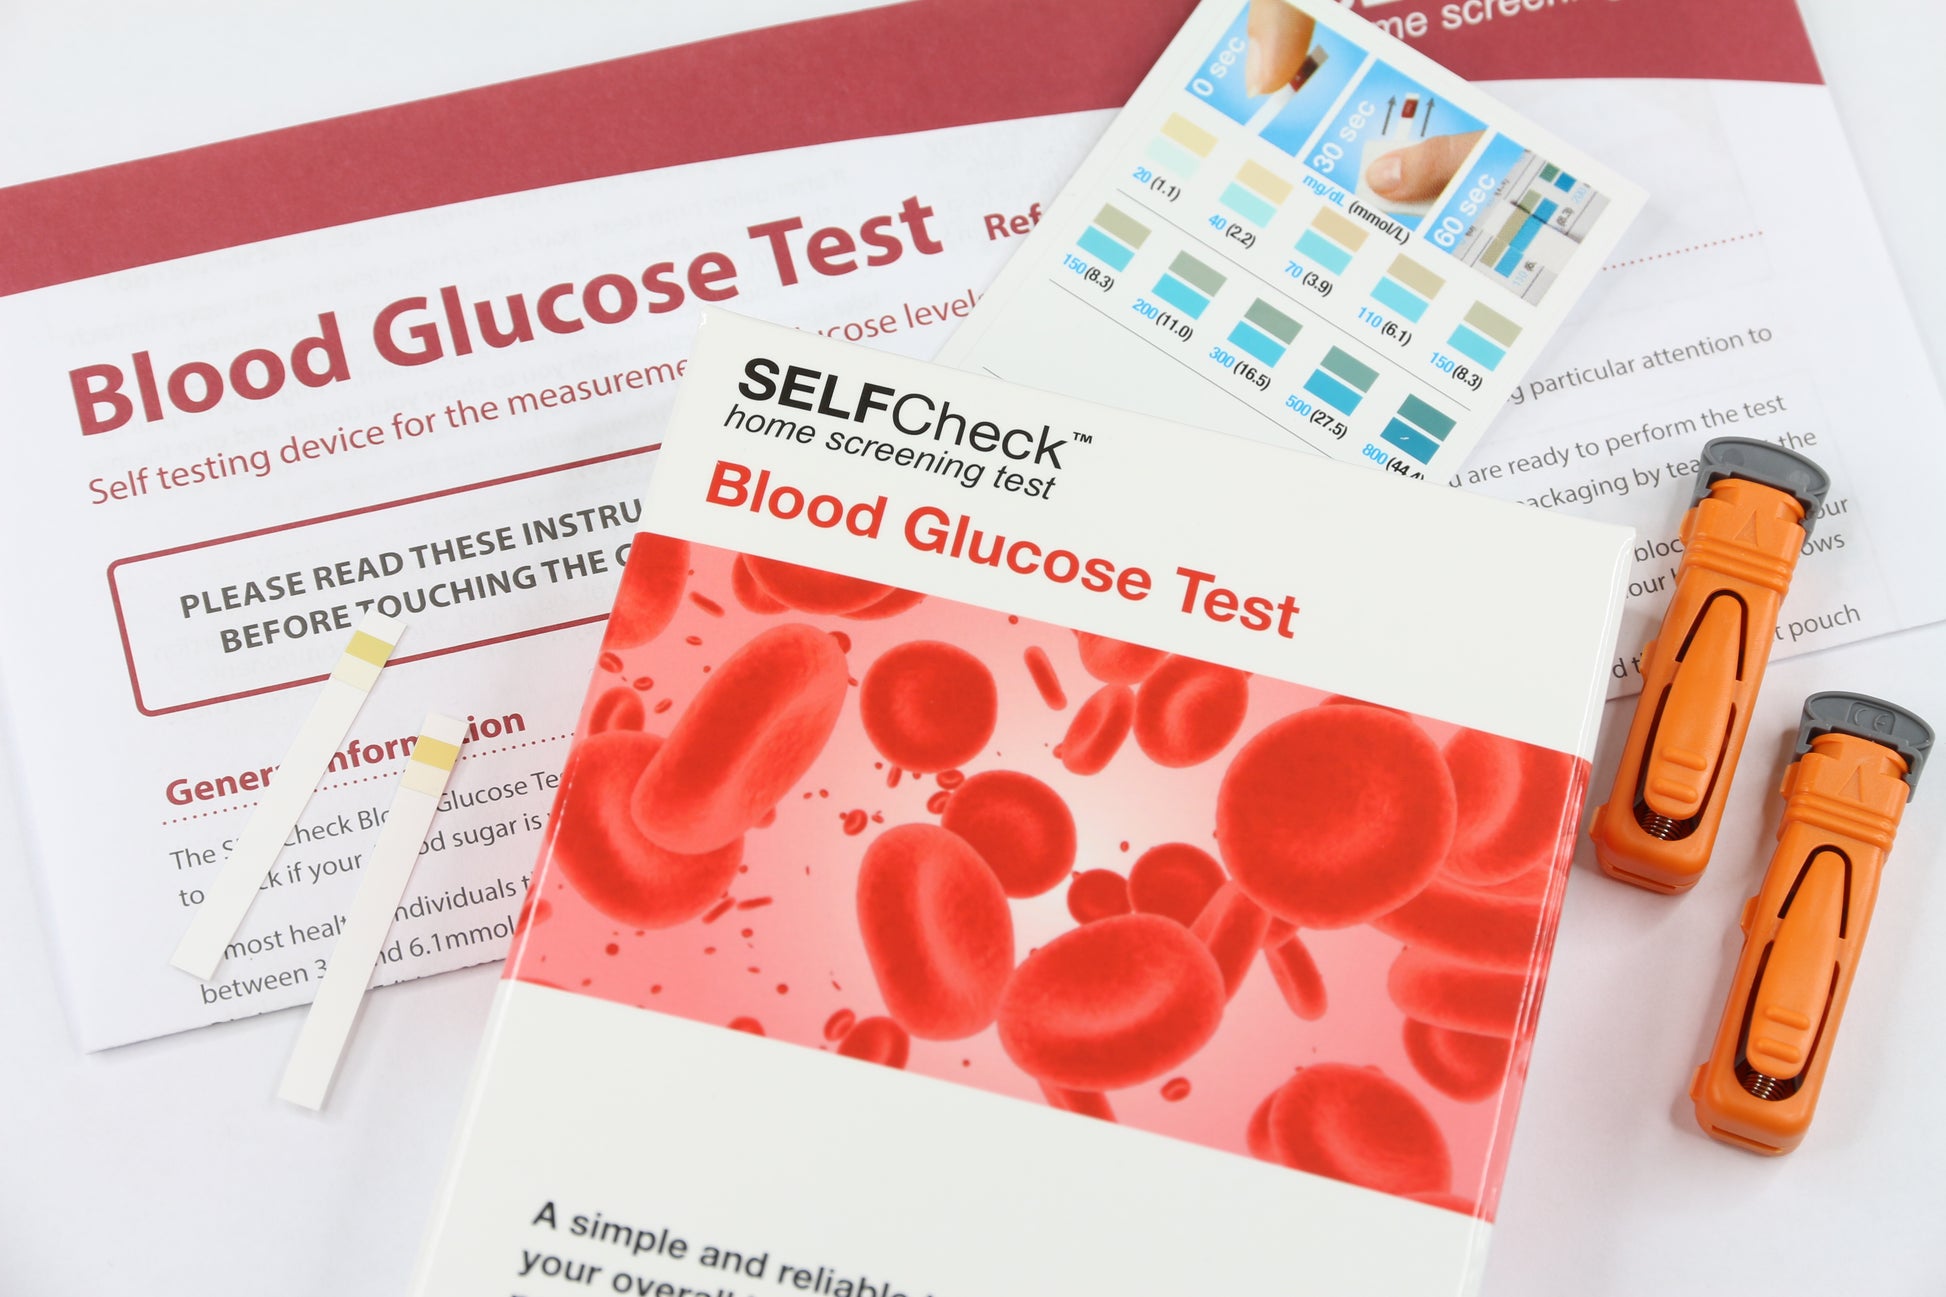 SELFCheck Blood Glucose Test for the diagnosis of diabetes